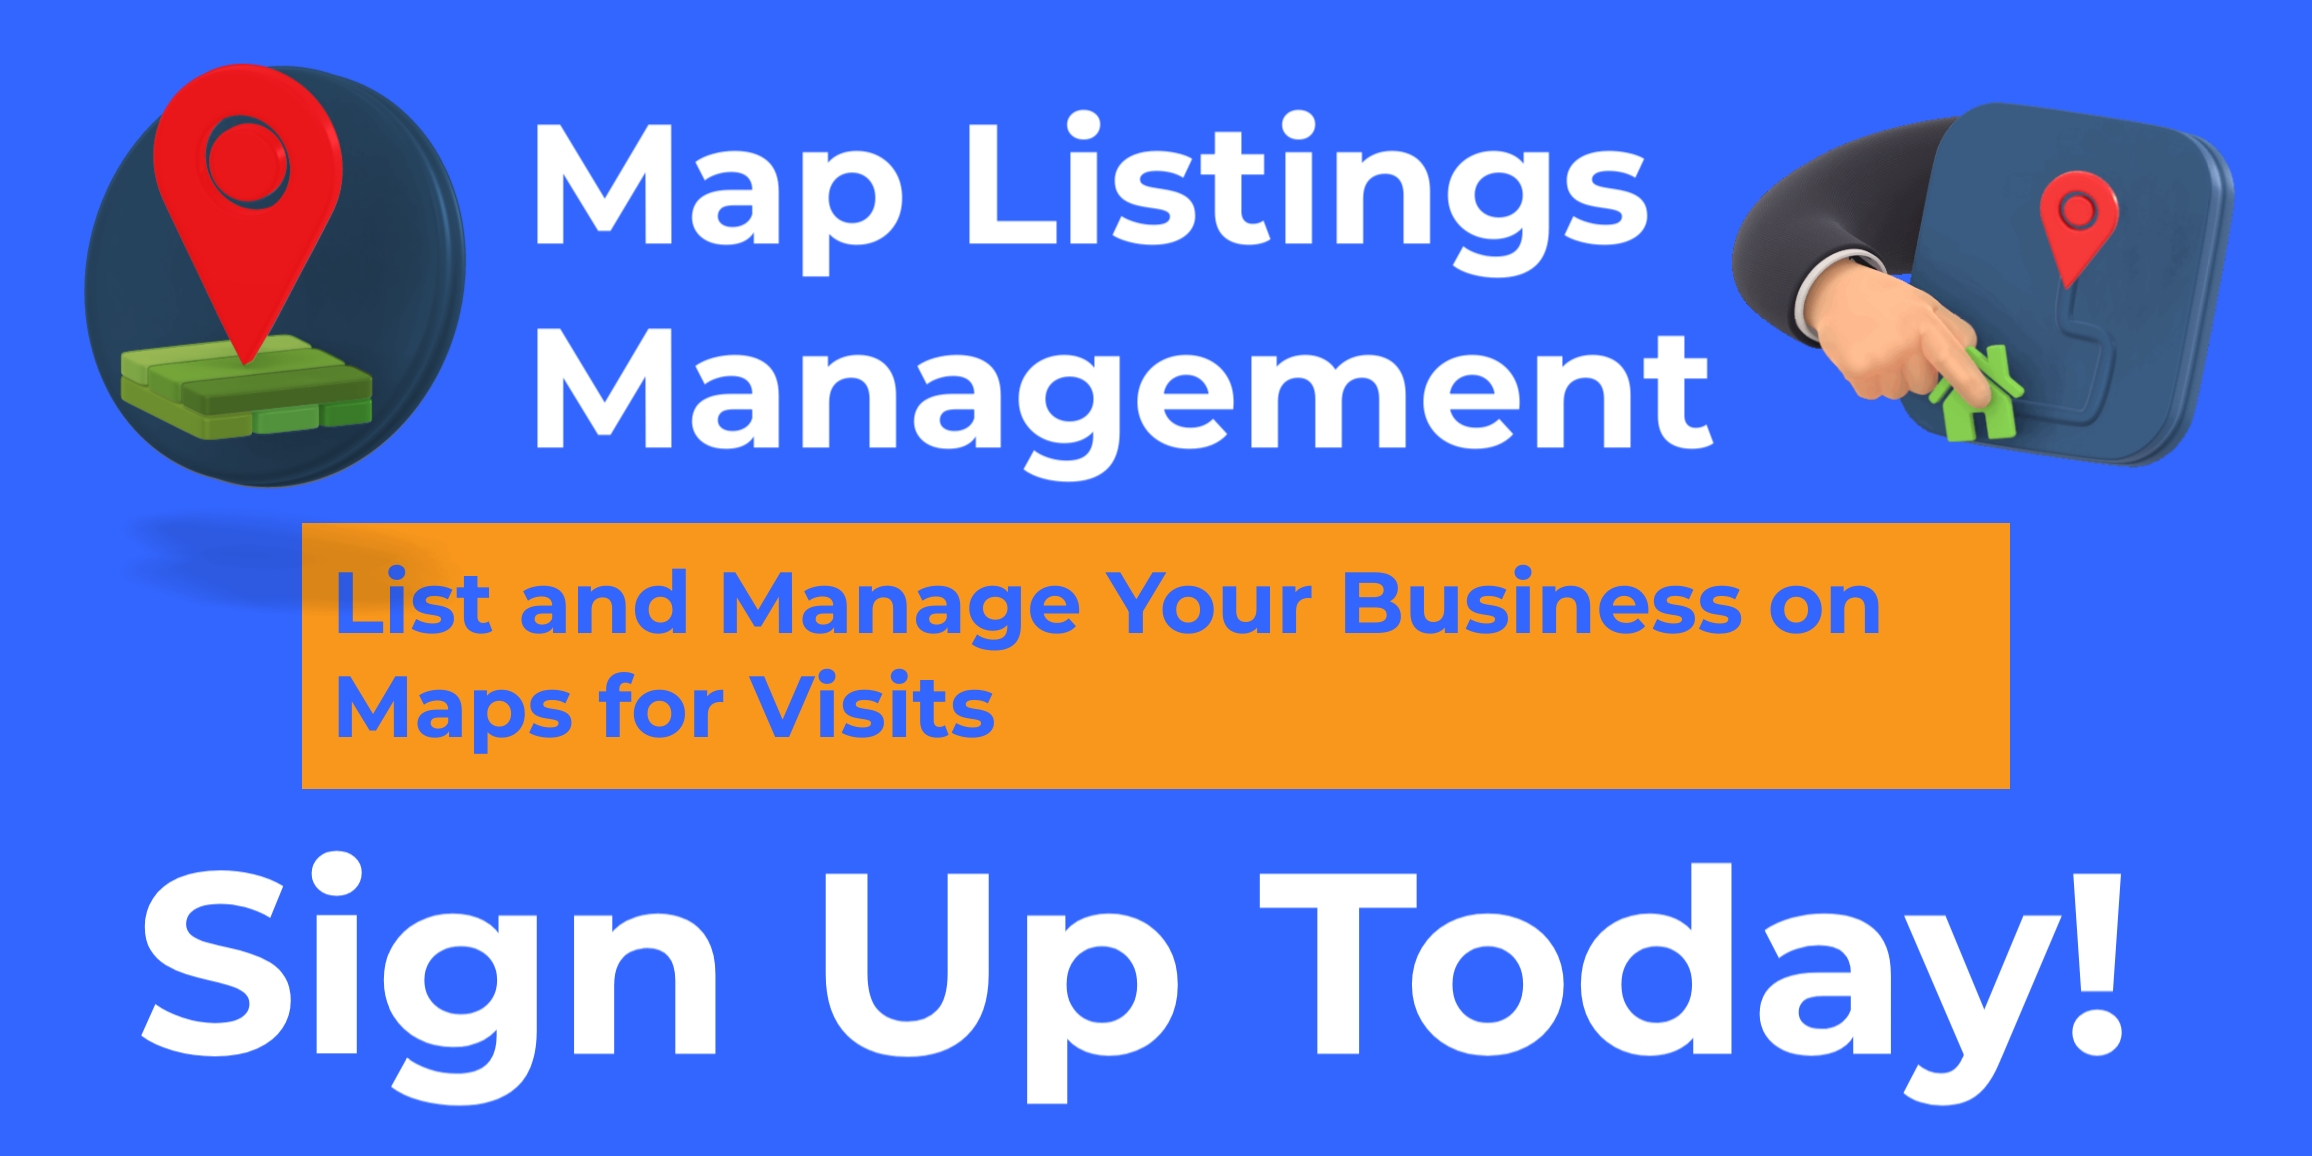 Get Listed on Maps for Visits and Lots of Traffic